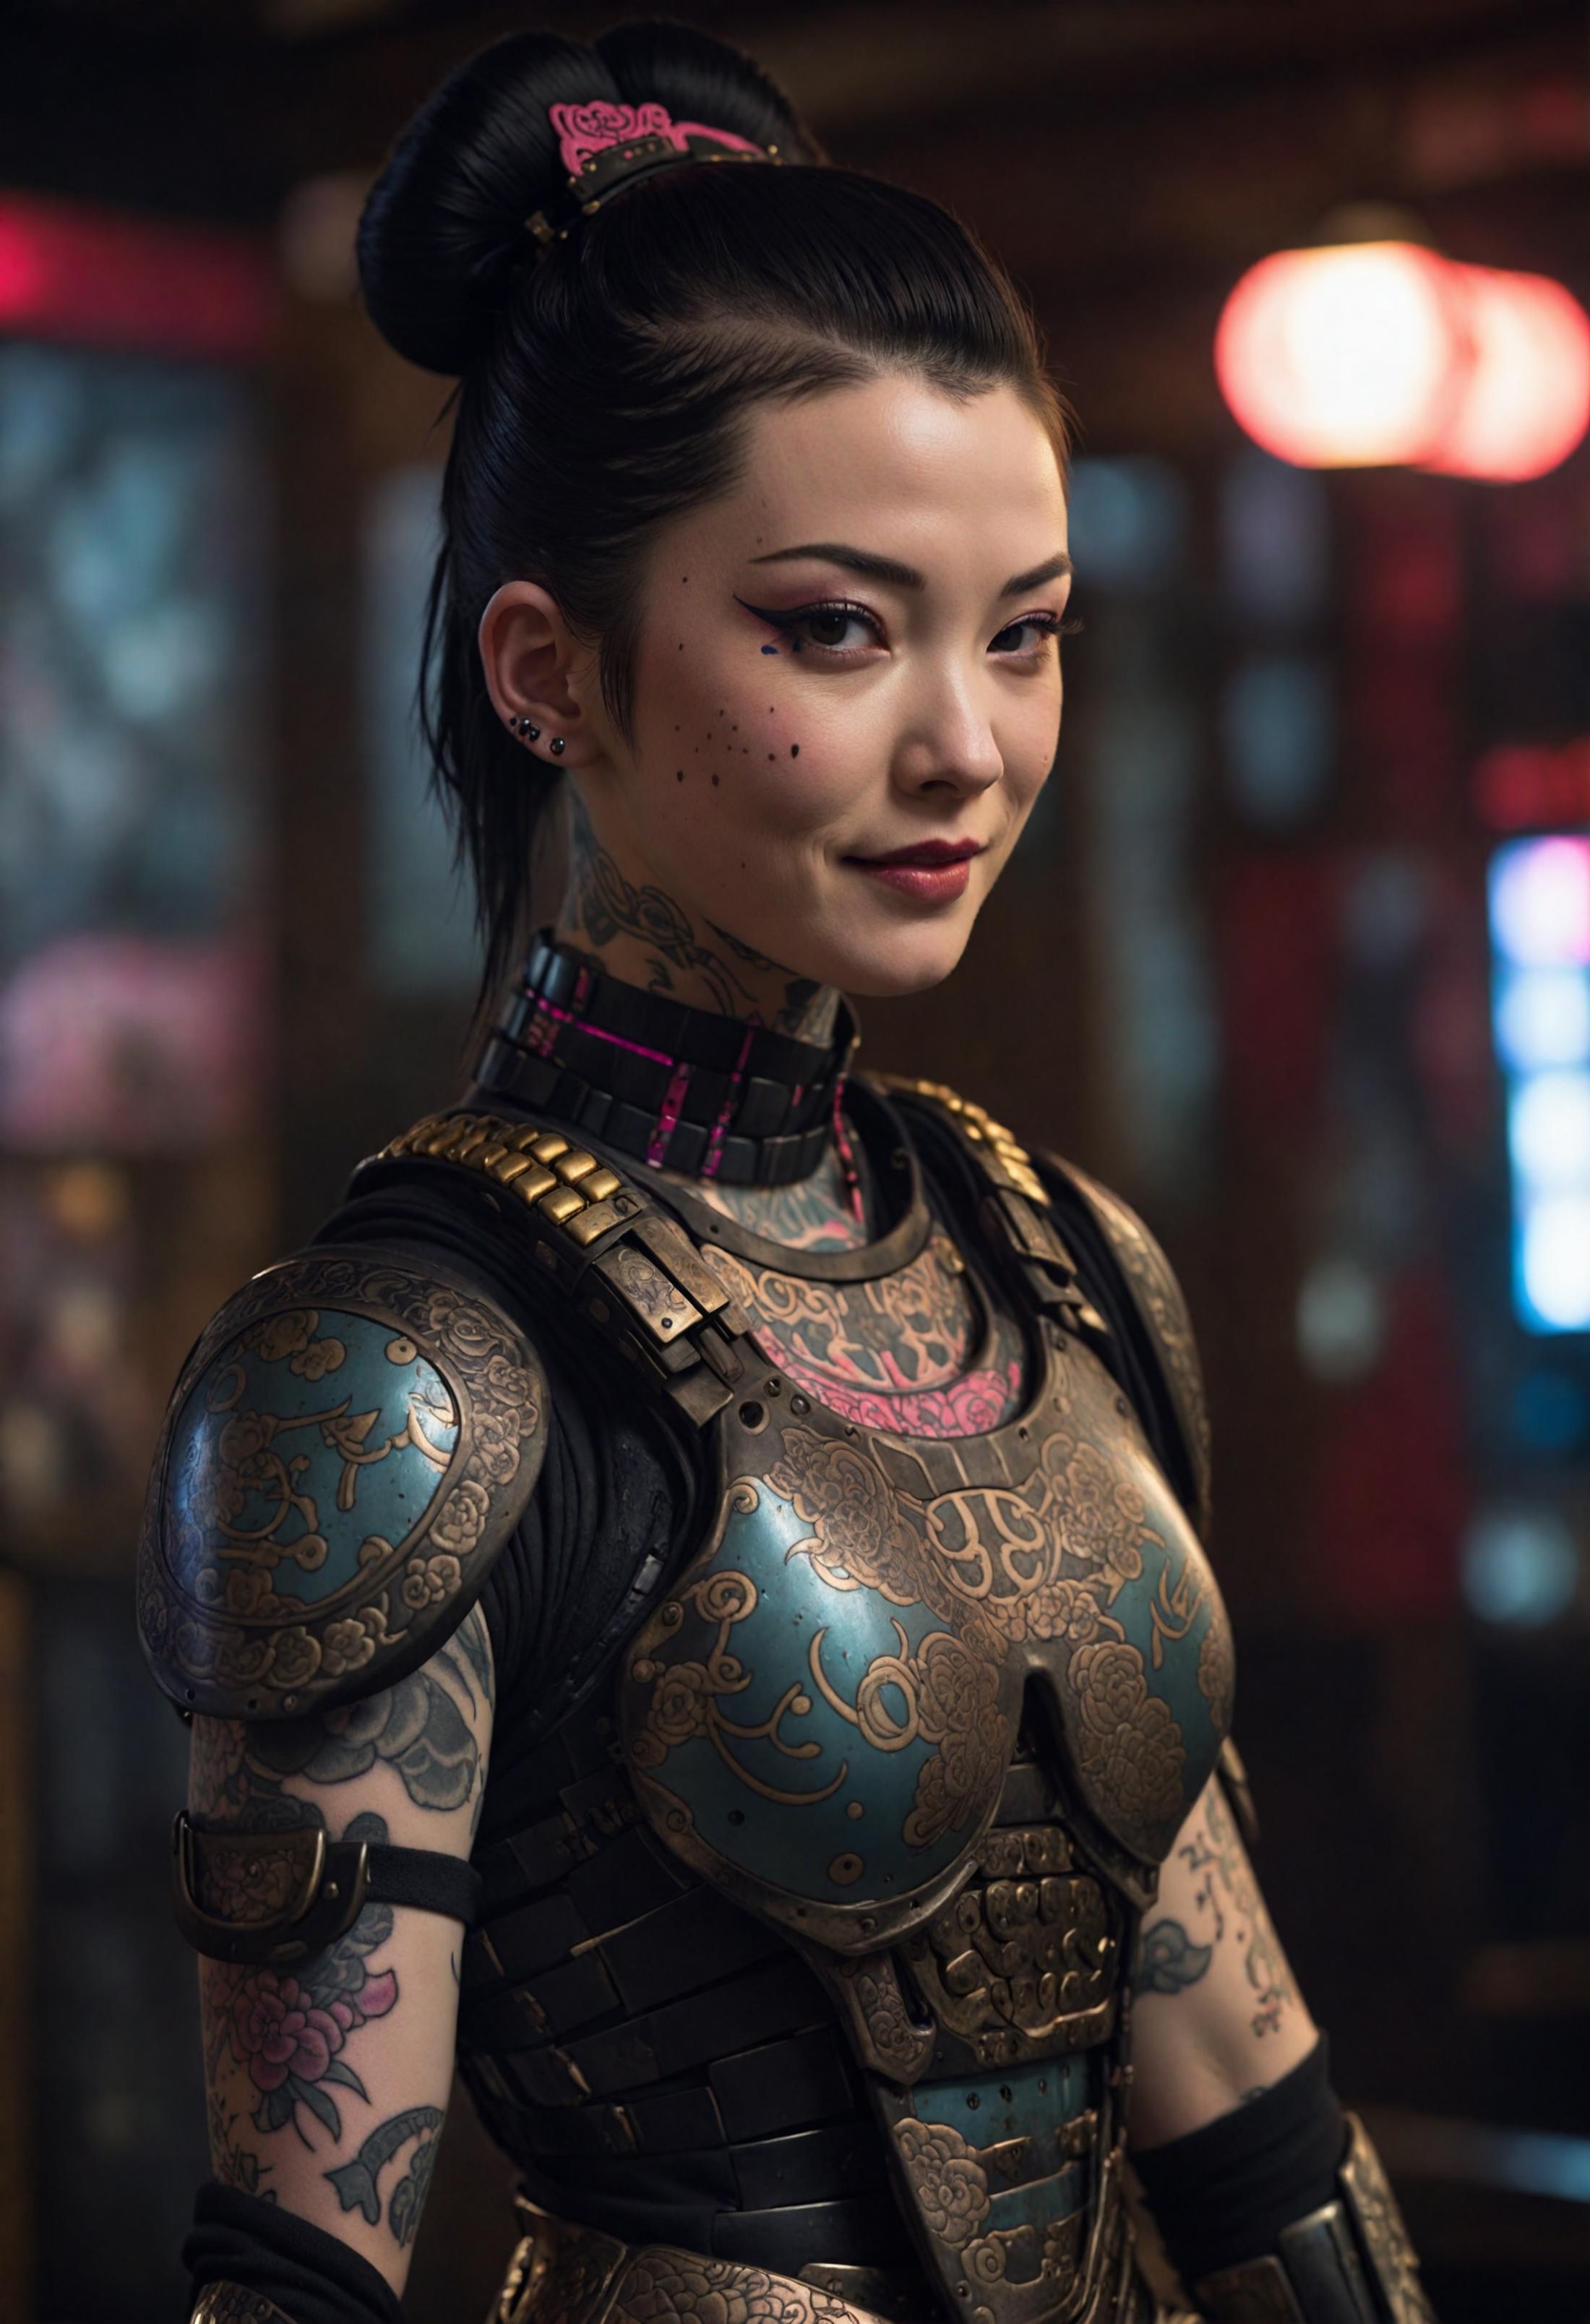 A woman with a tattooed face and body wearing a blue and gold armor.